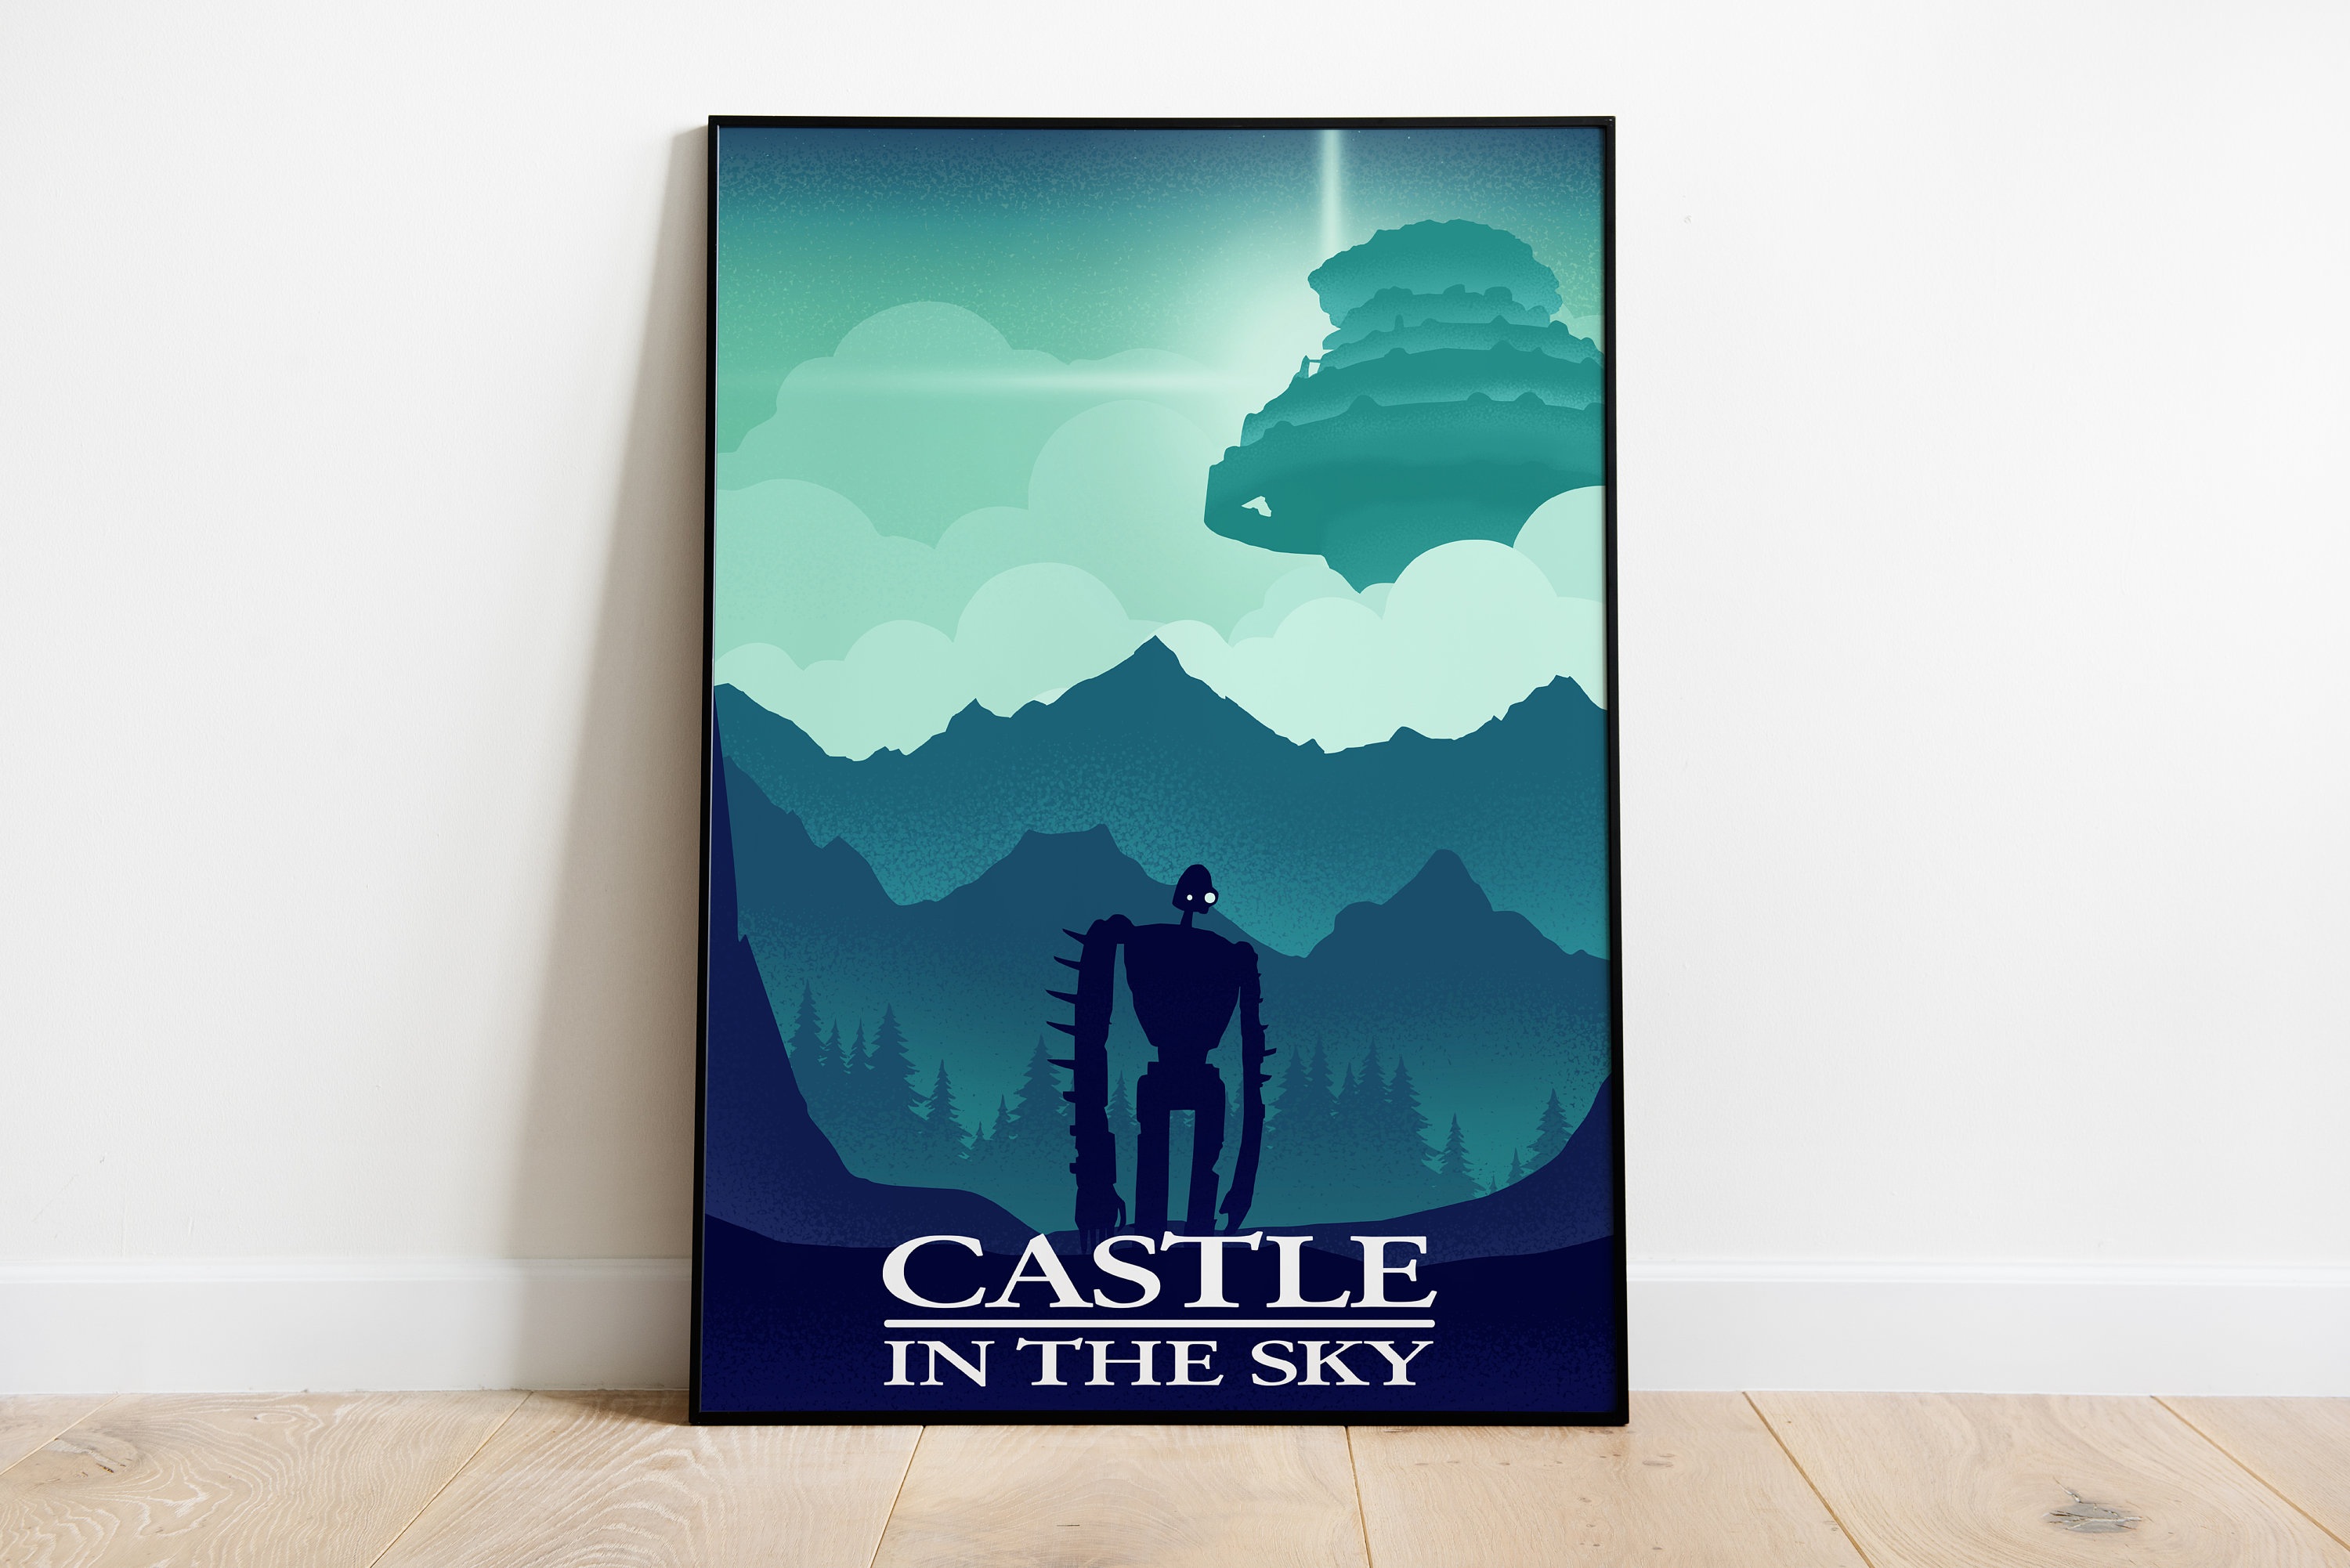 Castle in the Sky Poster - Studio Ghibli Anime Poster 01 - High Quality  Prints 11x17